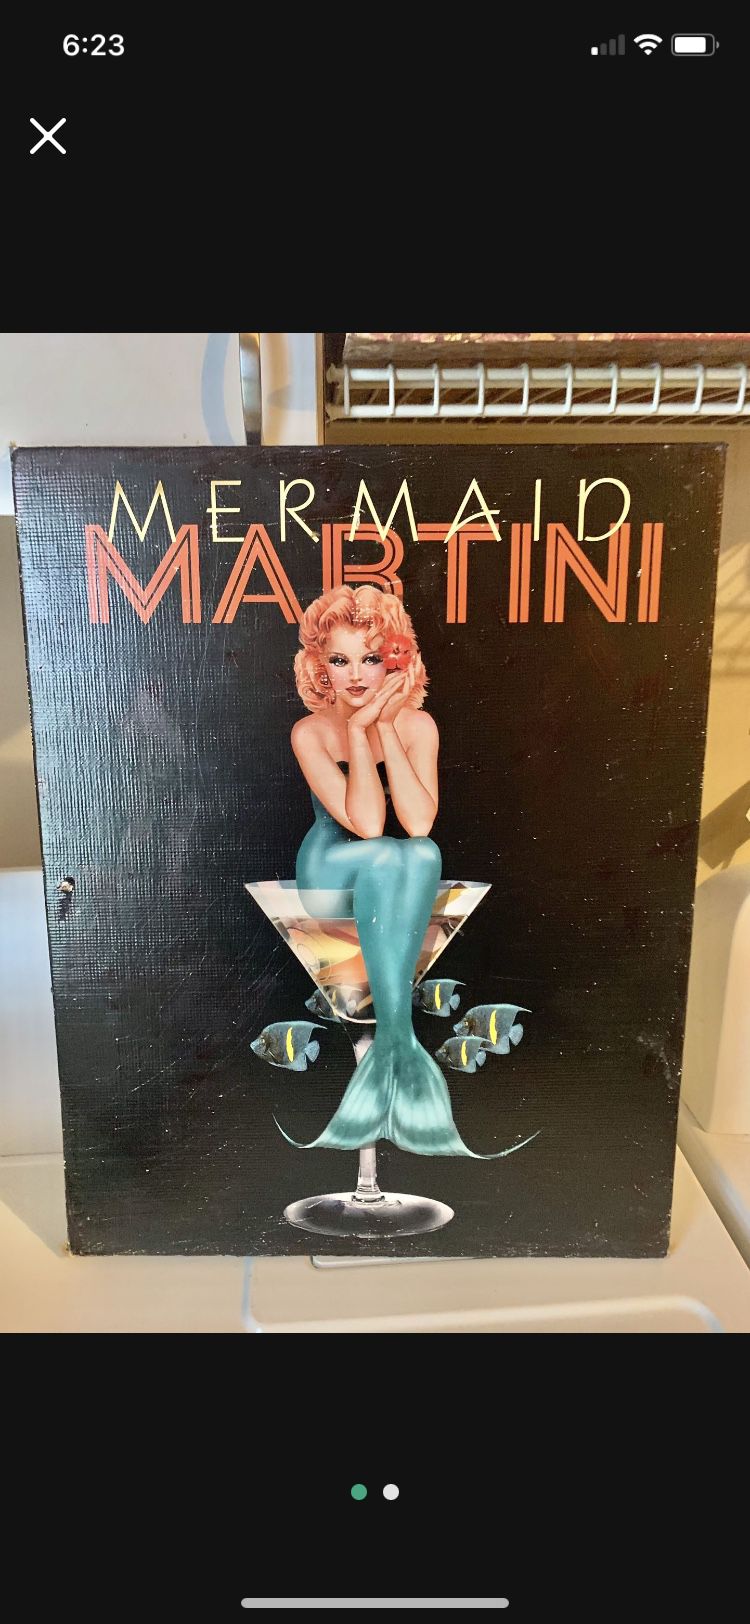 VTG Mermaid Martini PinUp by Ralph Burch 2003 on heavy board some age